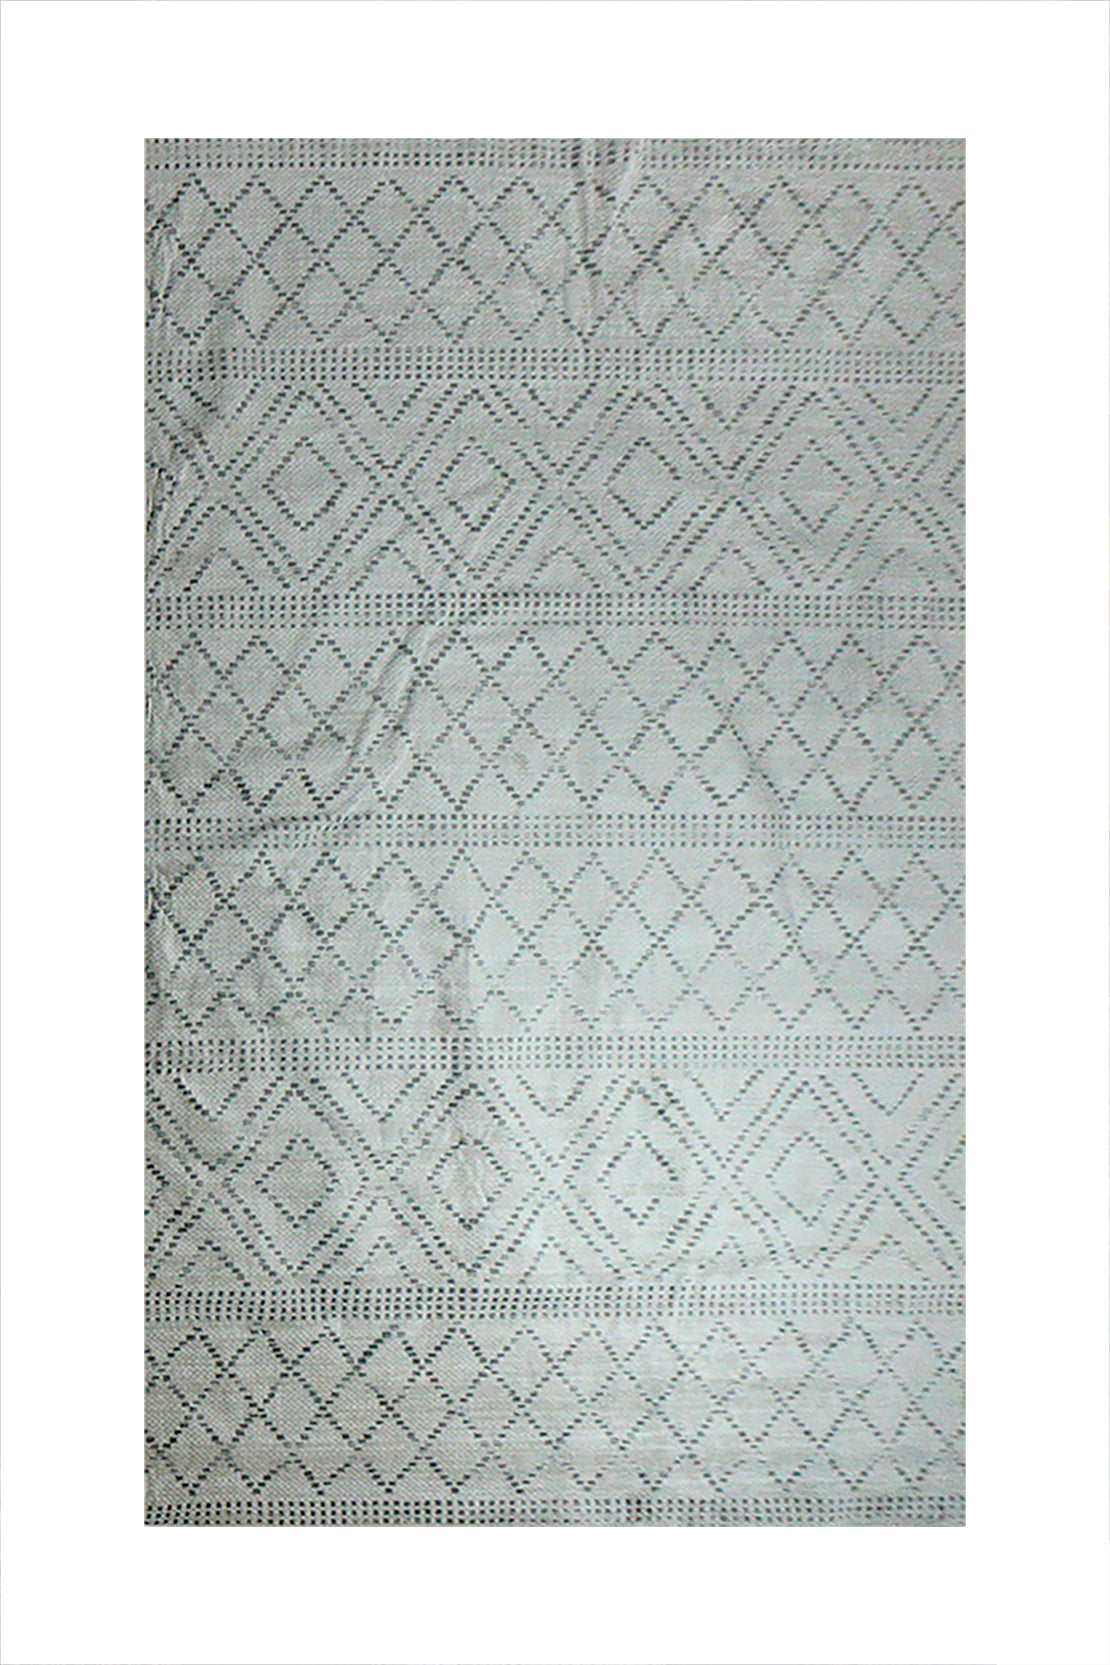 Turkish Modern Festival WD Rug - 6.6 x 9.4 FT - Gray and Cream - Sleek and Minimalist for Chic Interiors